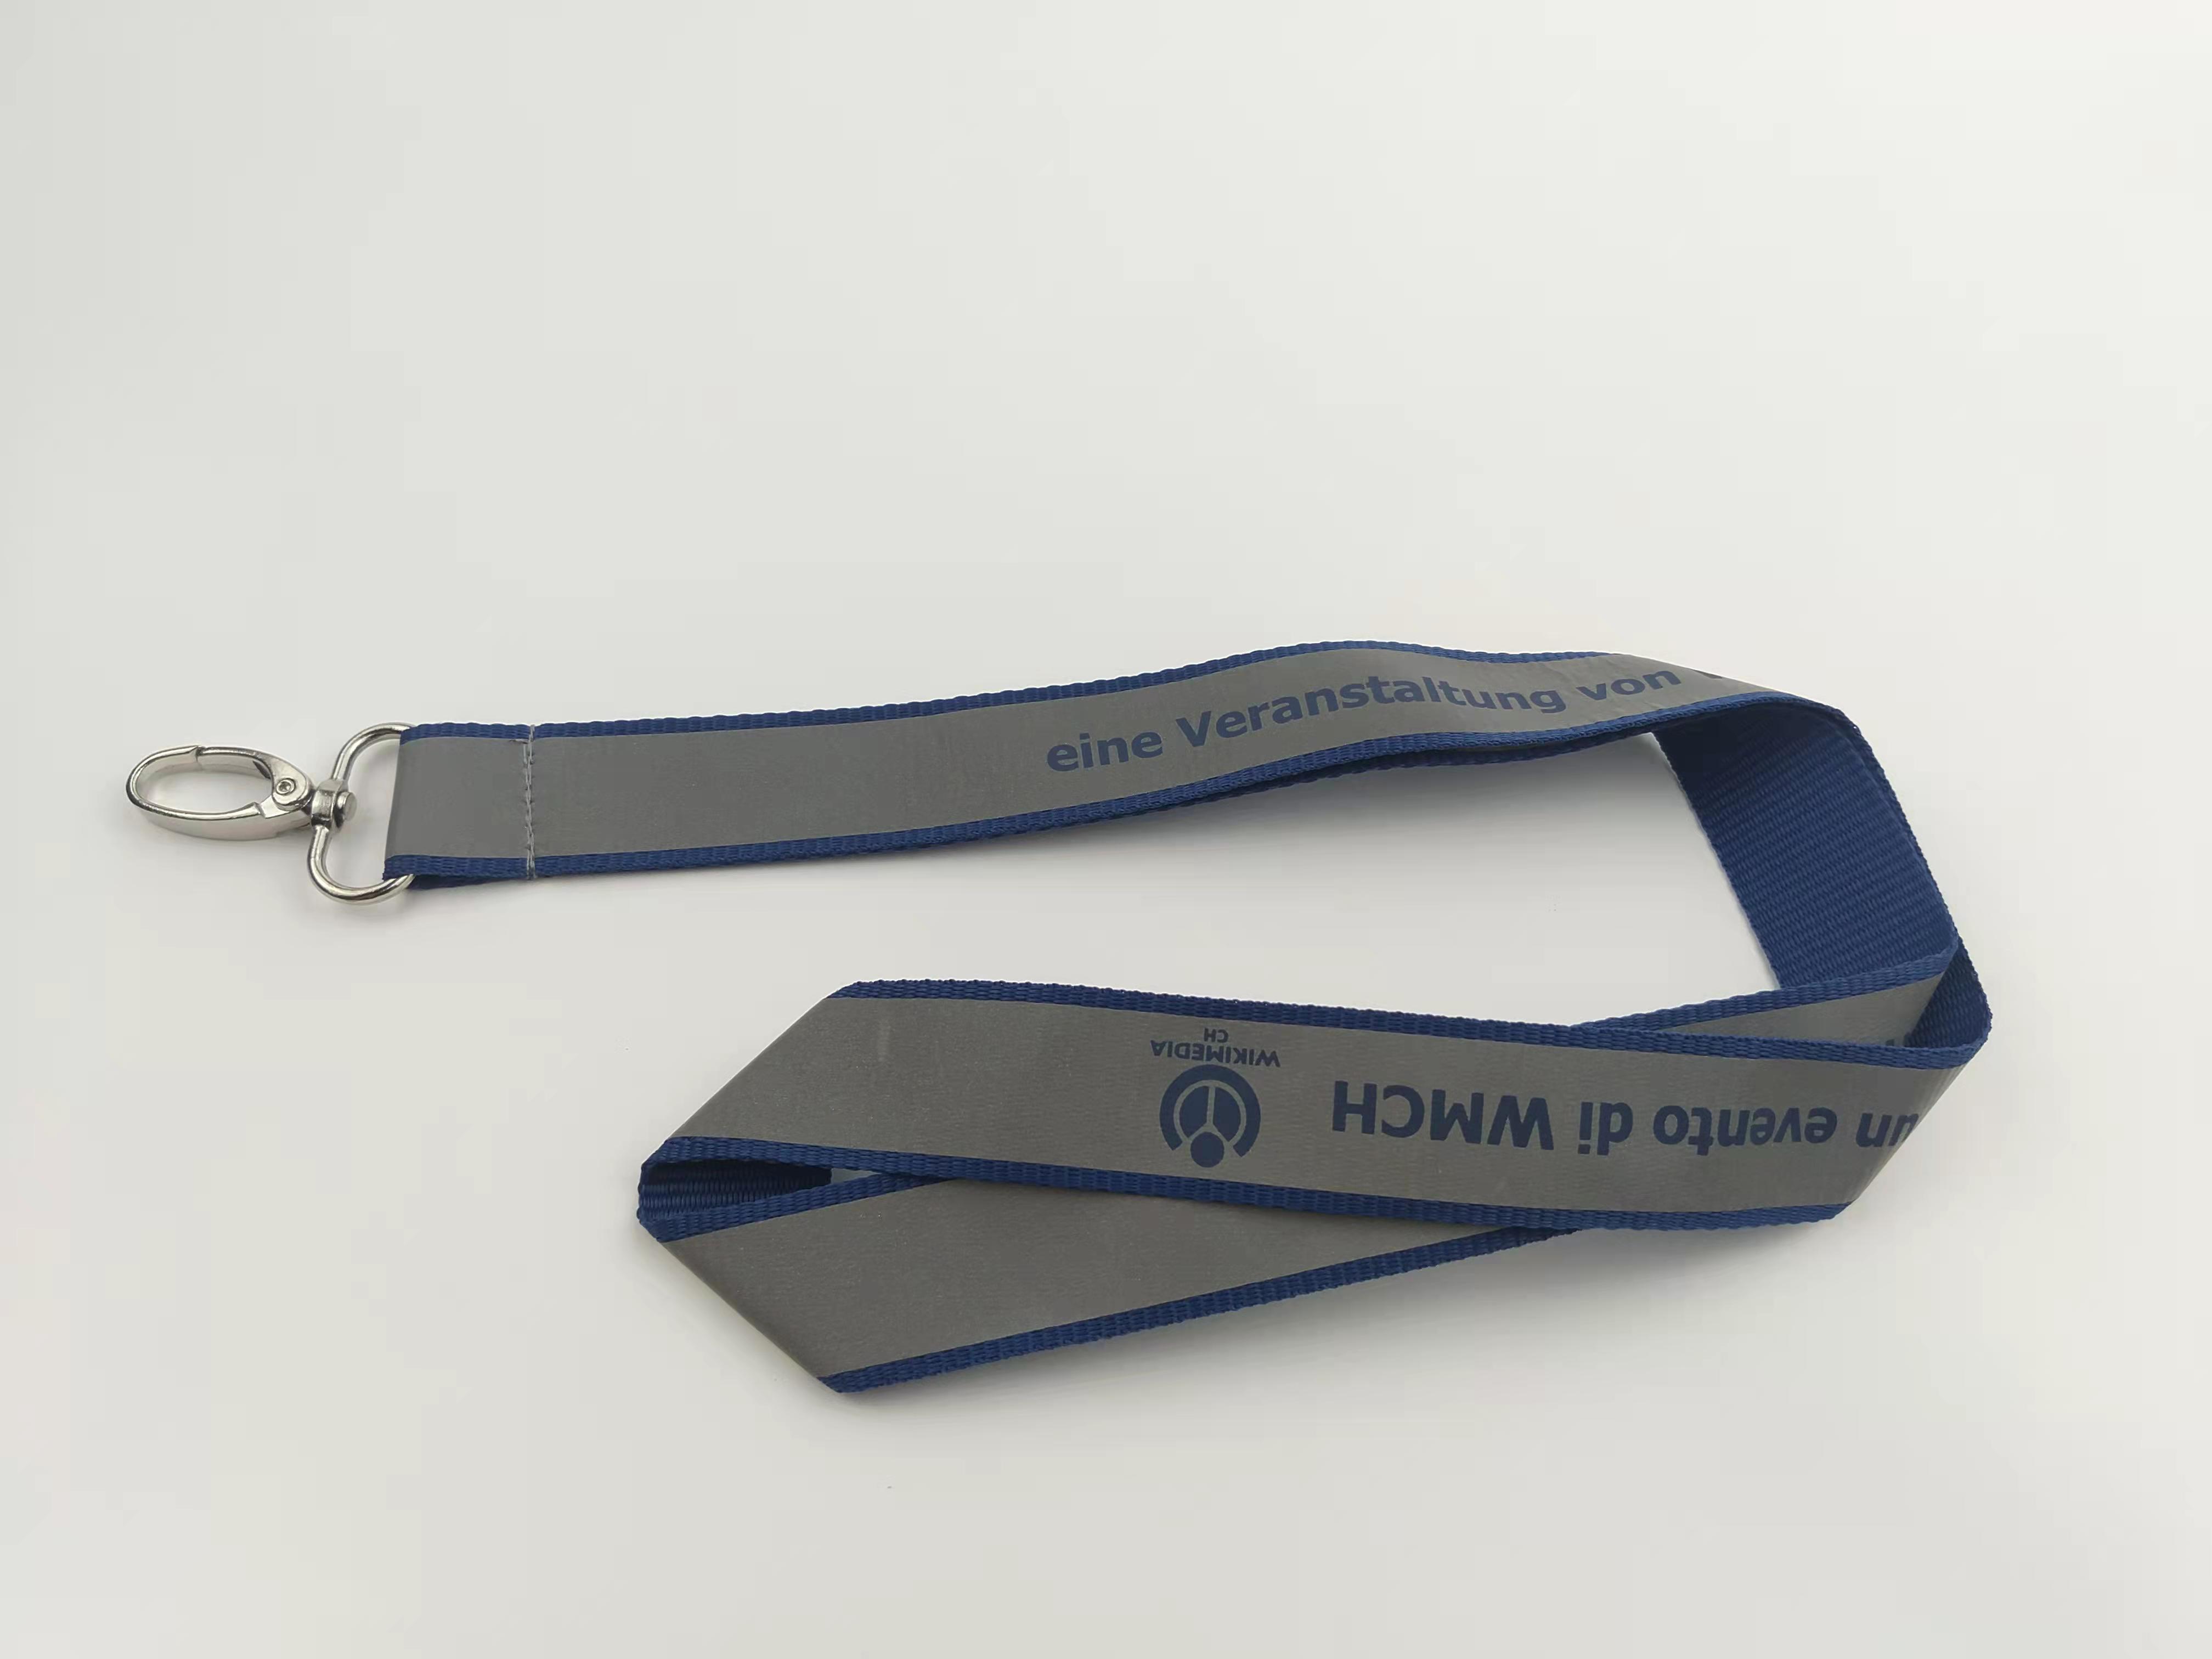 Visible Reflective Lanyard With Loops For Hiking